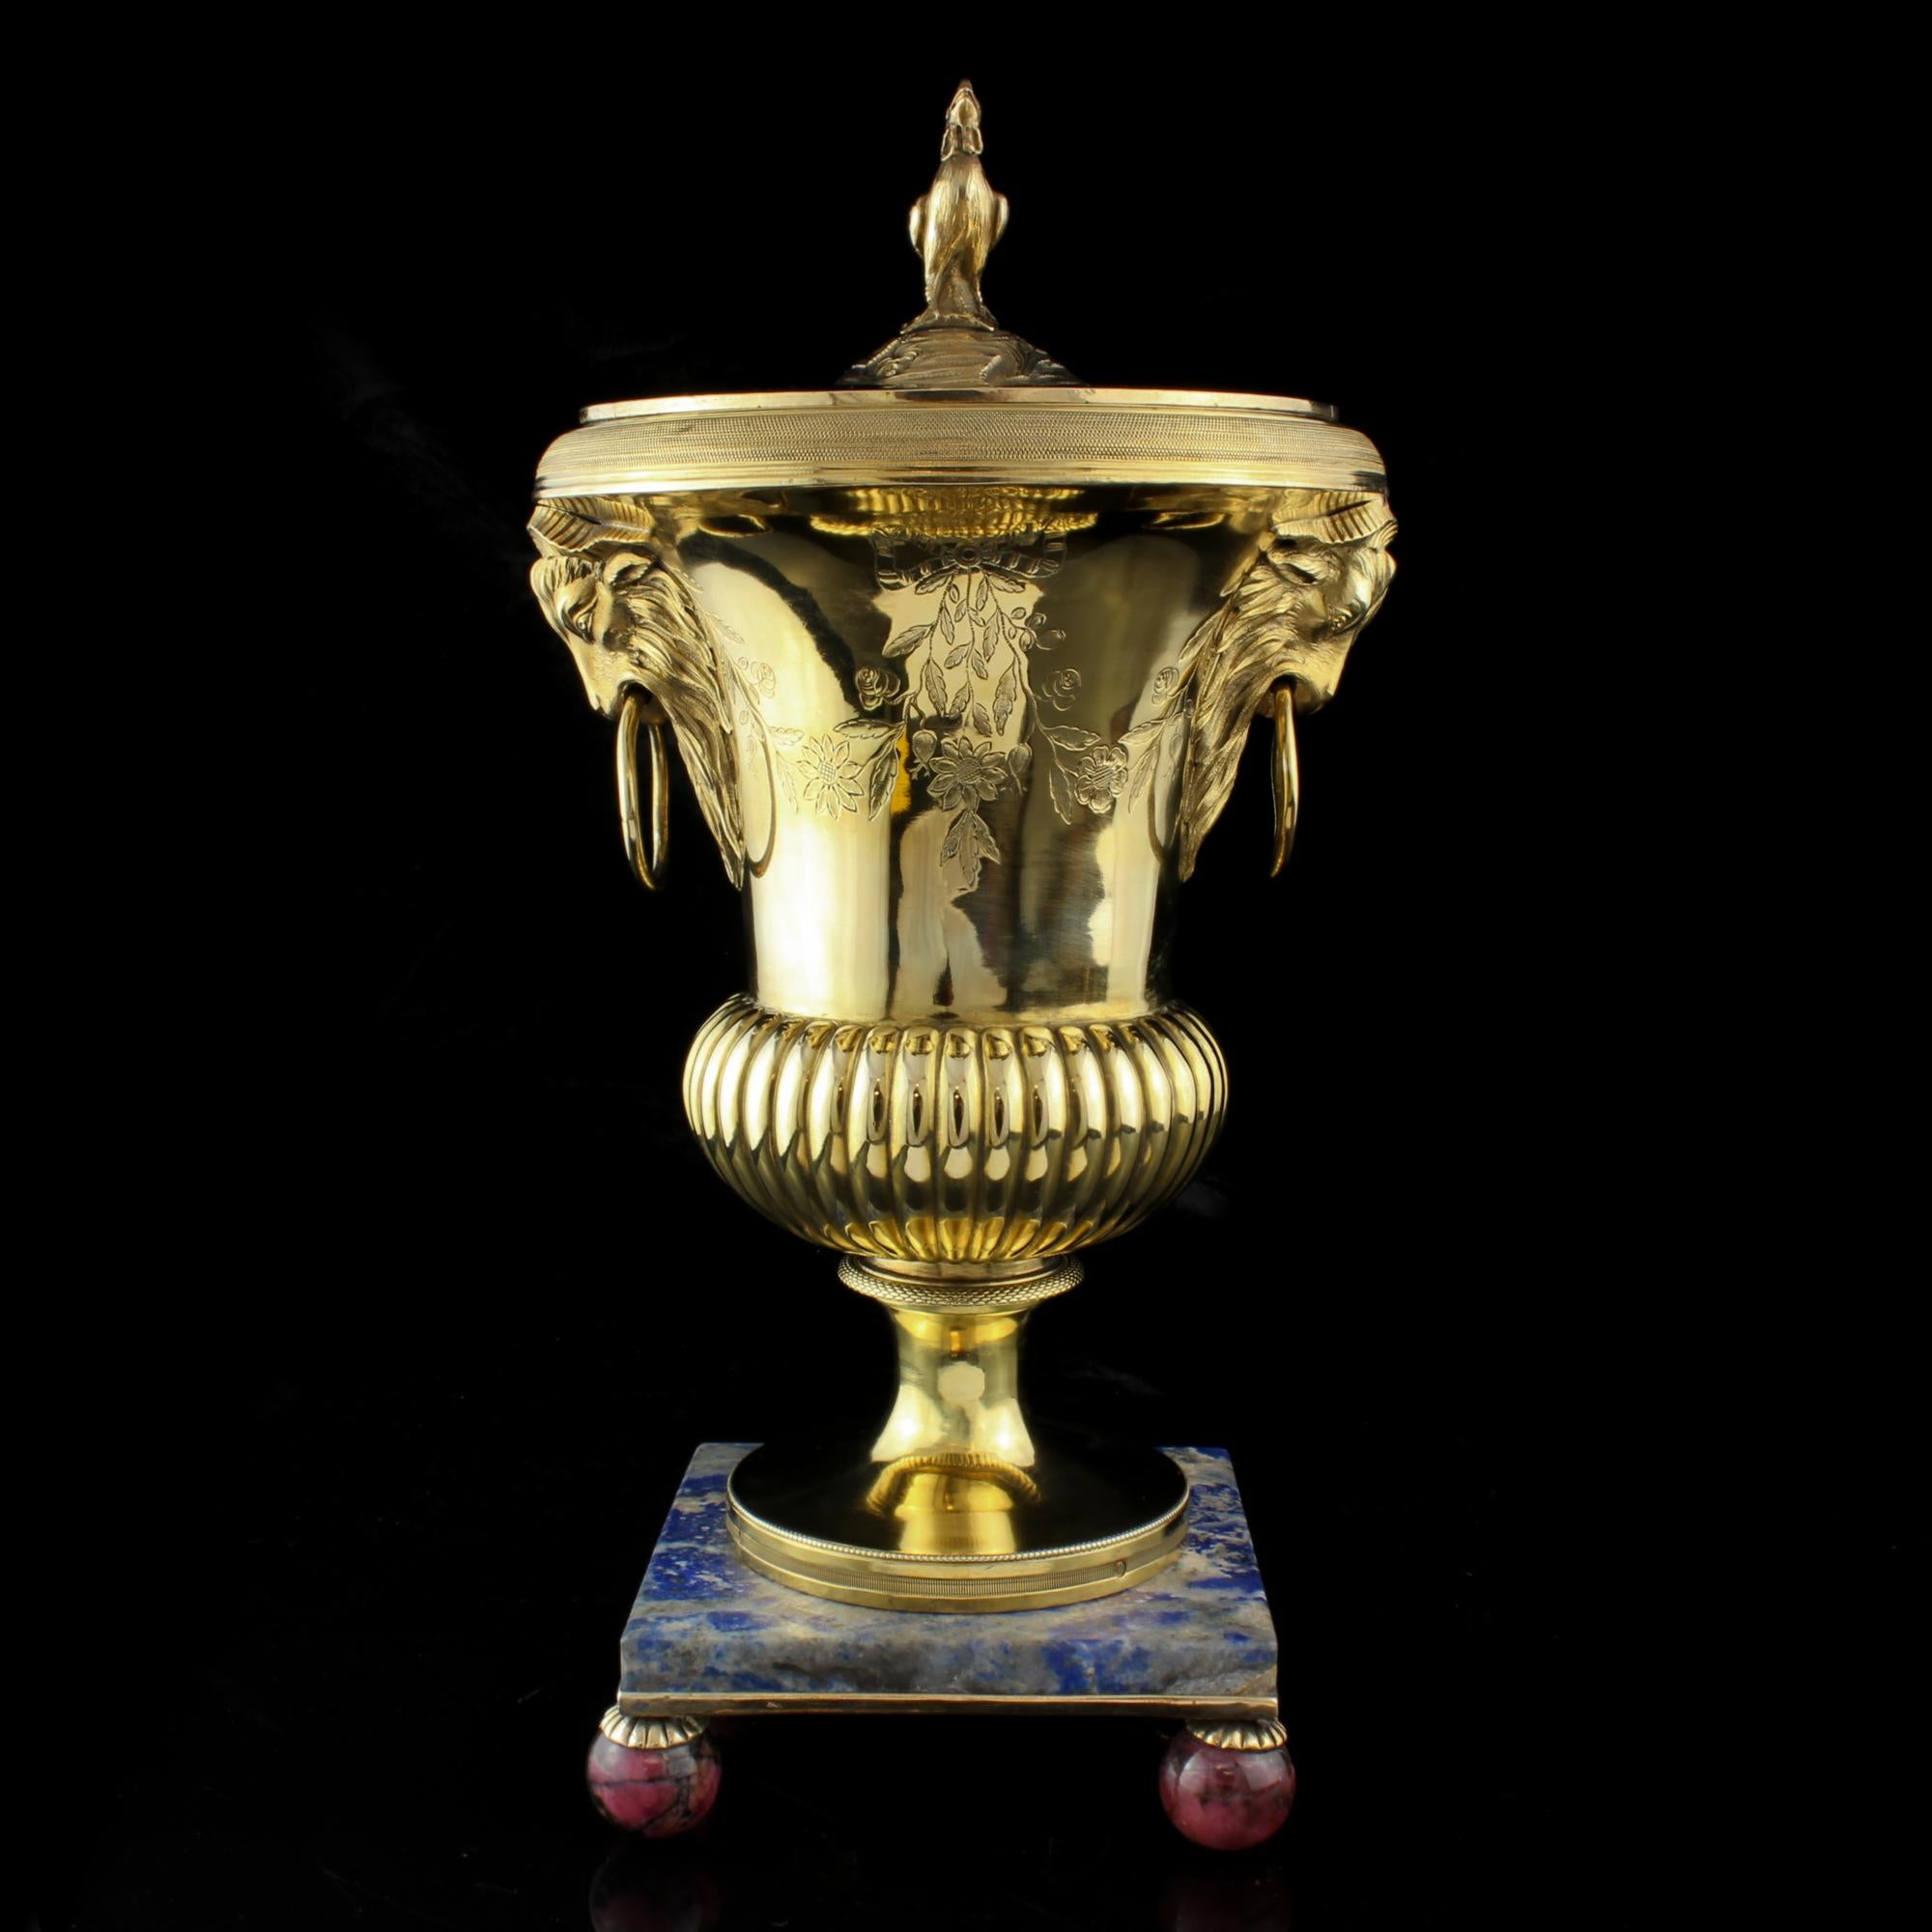 Antique French silver gilt vase and cover / urn with rooster lid
Mounted in Lapis Lazuli base with Rhodonite legs.
With two goat-mask drop-ring handles.
Maker: Nicolas Richard Masson - Paris
Made in France, 1798-1809
Fully